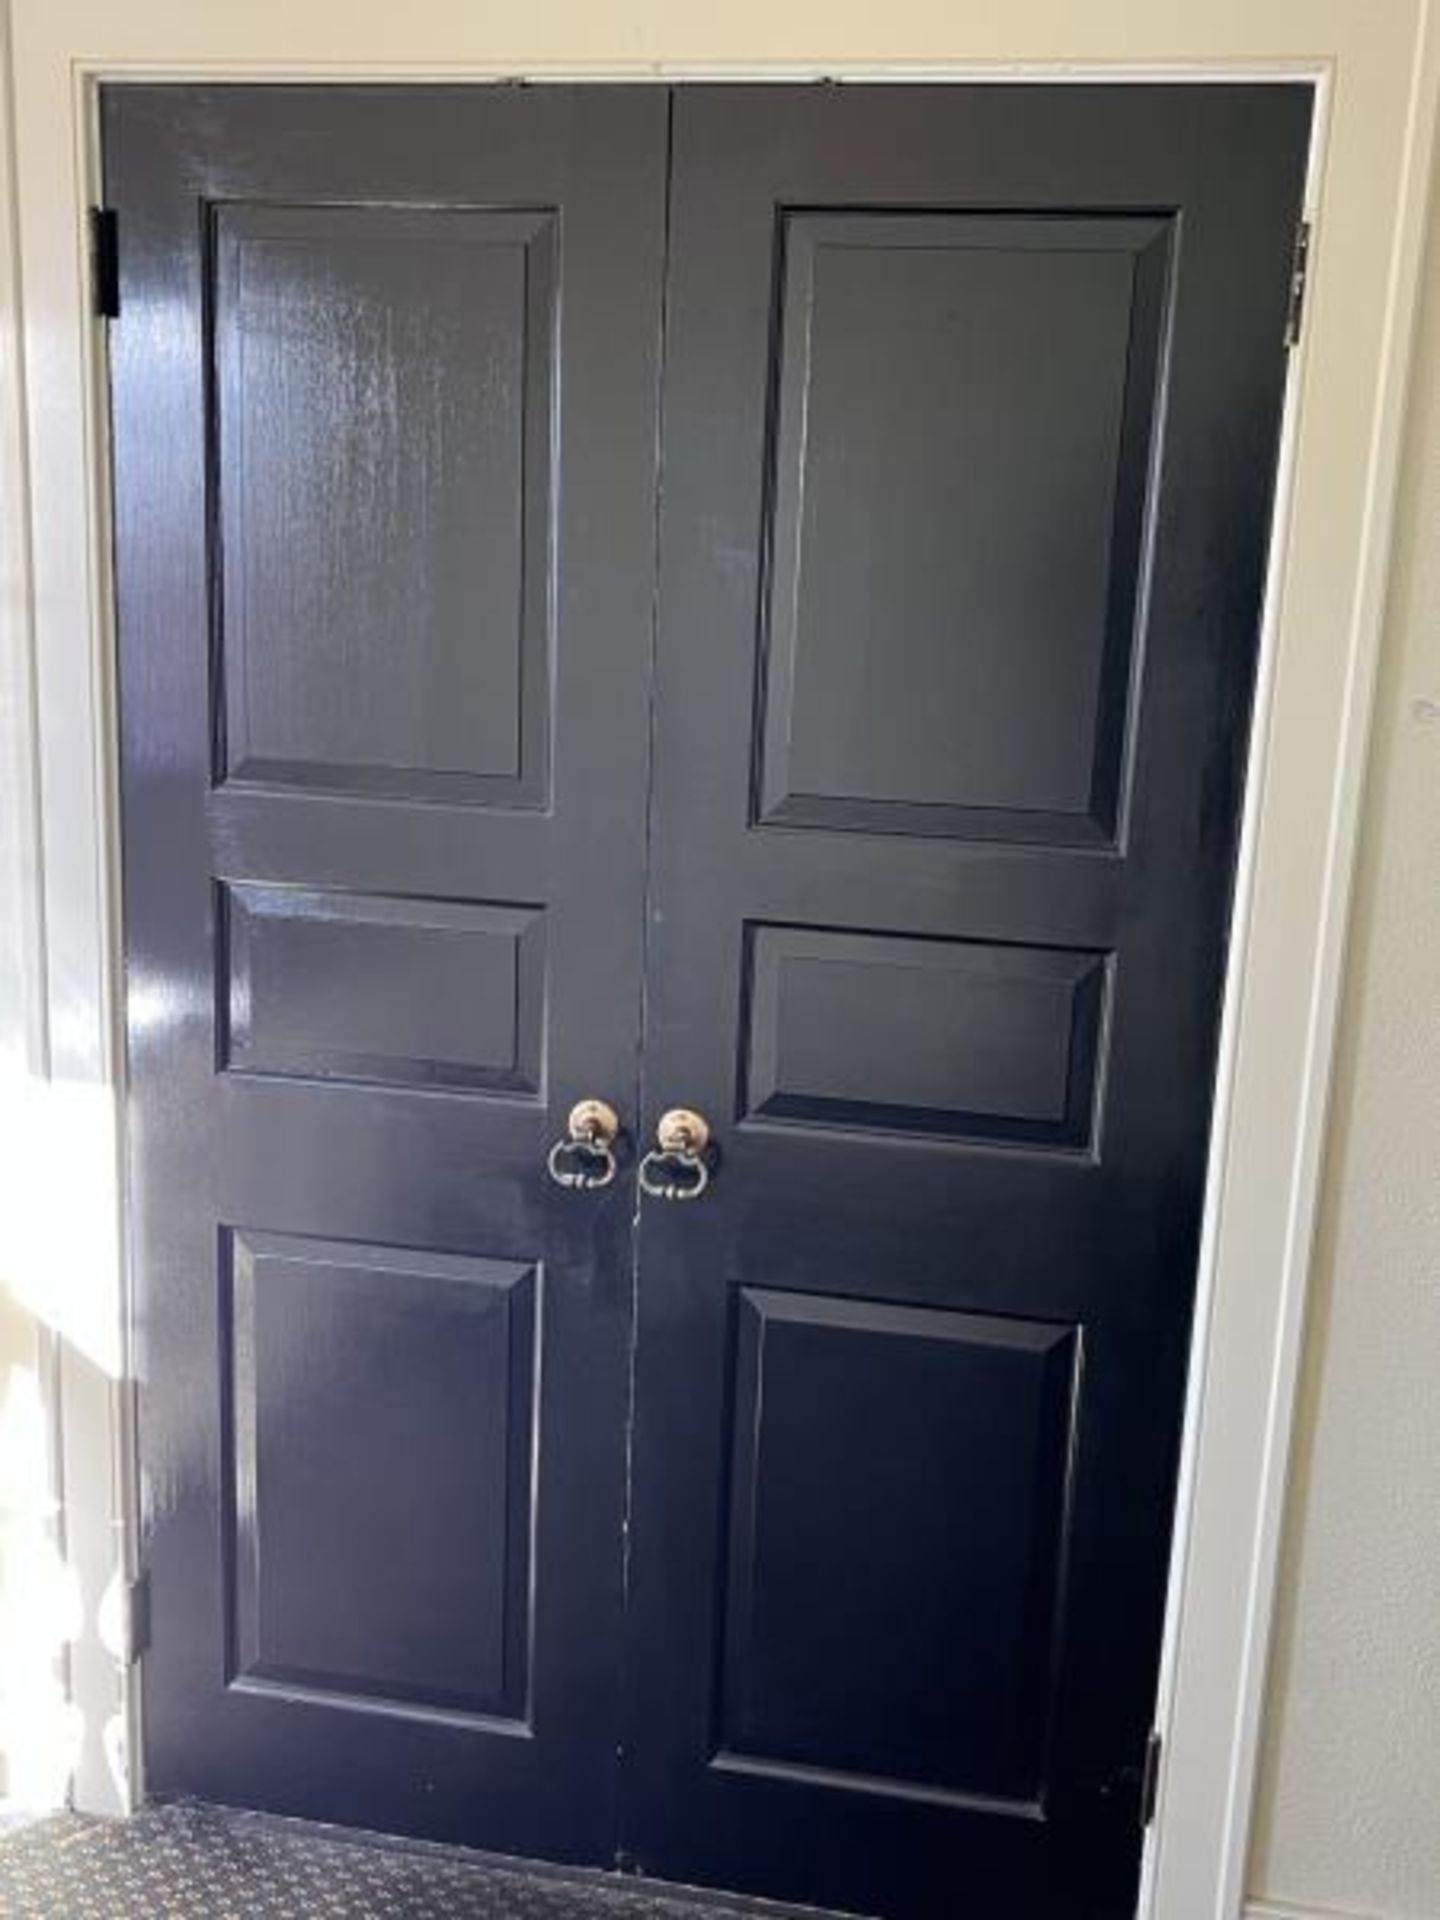 Single Set of Double Doors for a 4' Opening, Brass Hardware, 79.5" x 24" Each, Locaterd Upstairs